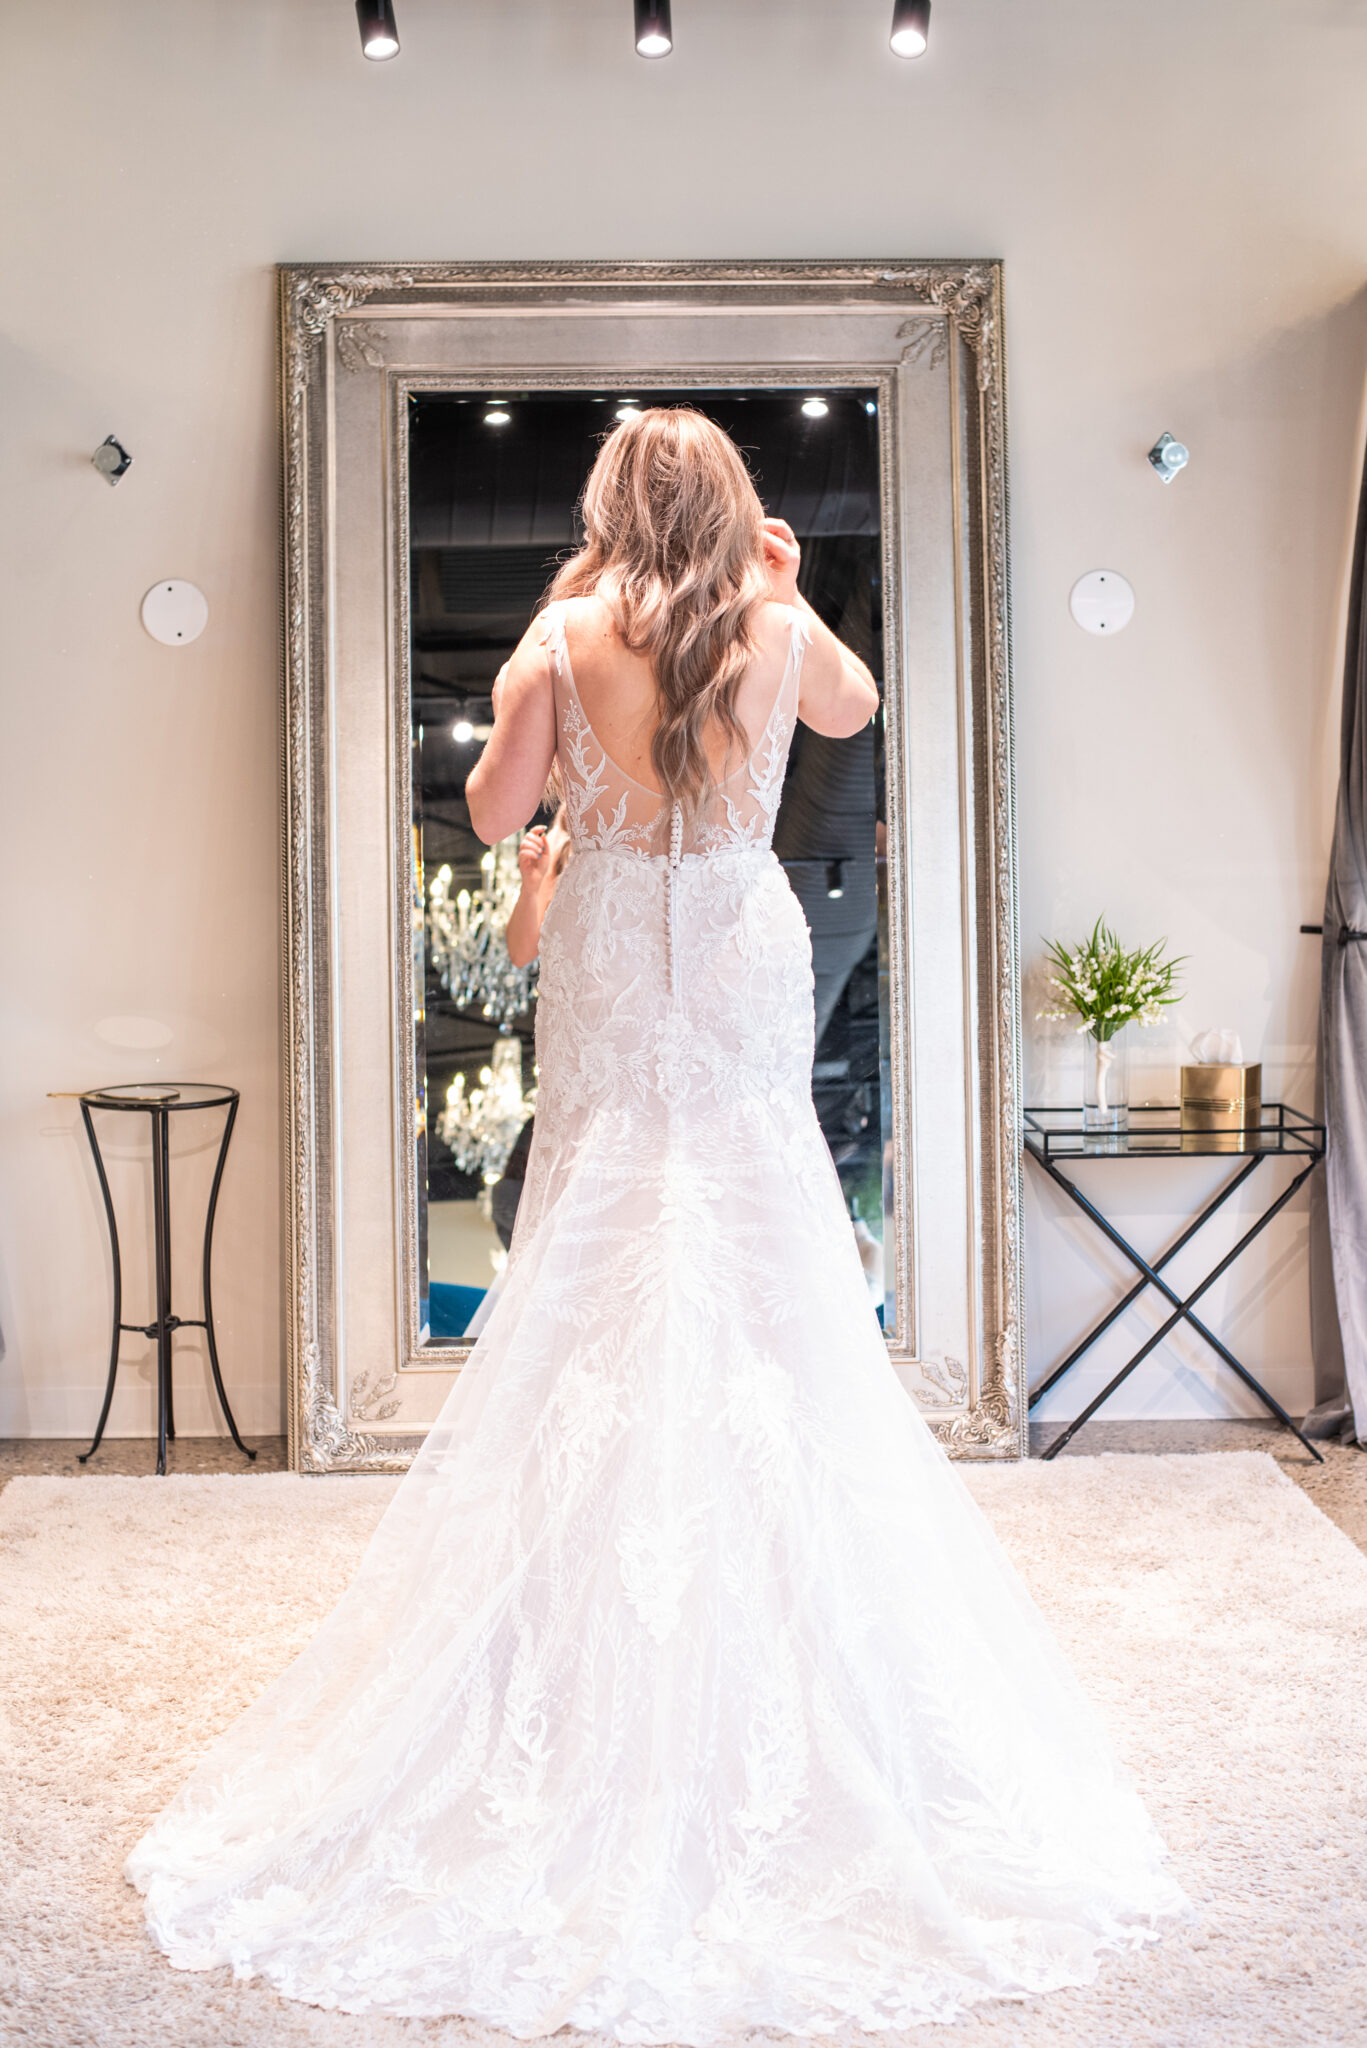 shot of woman's back as she checks herself out in mirror wearing white bridal dress